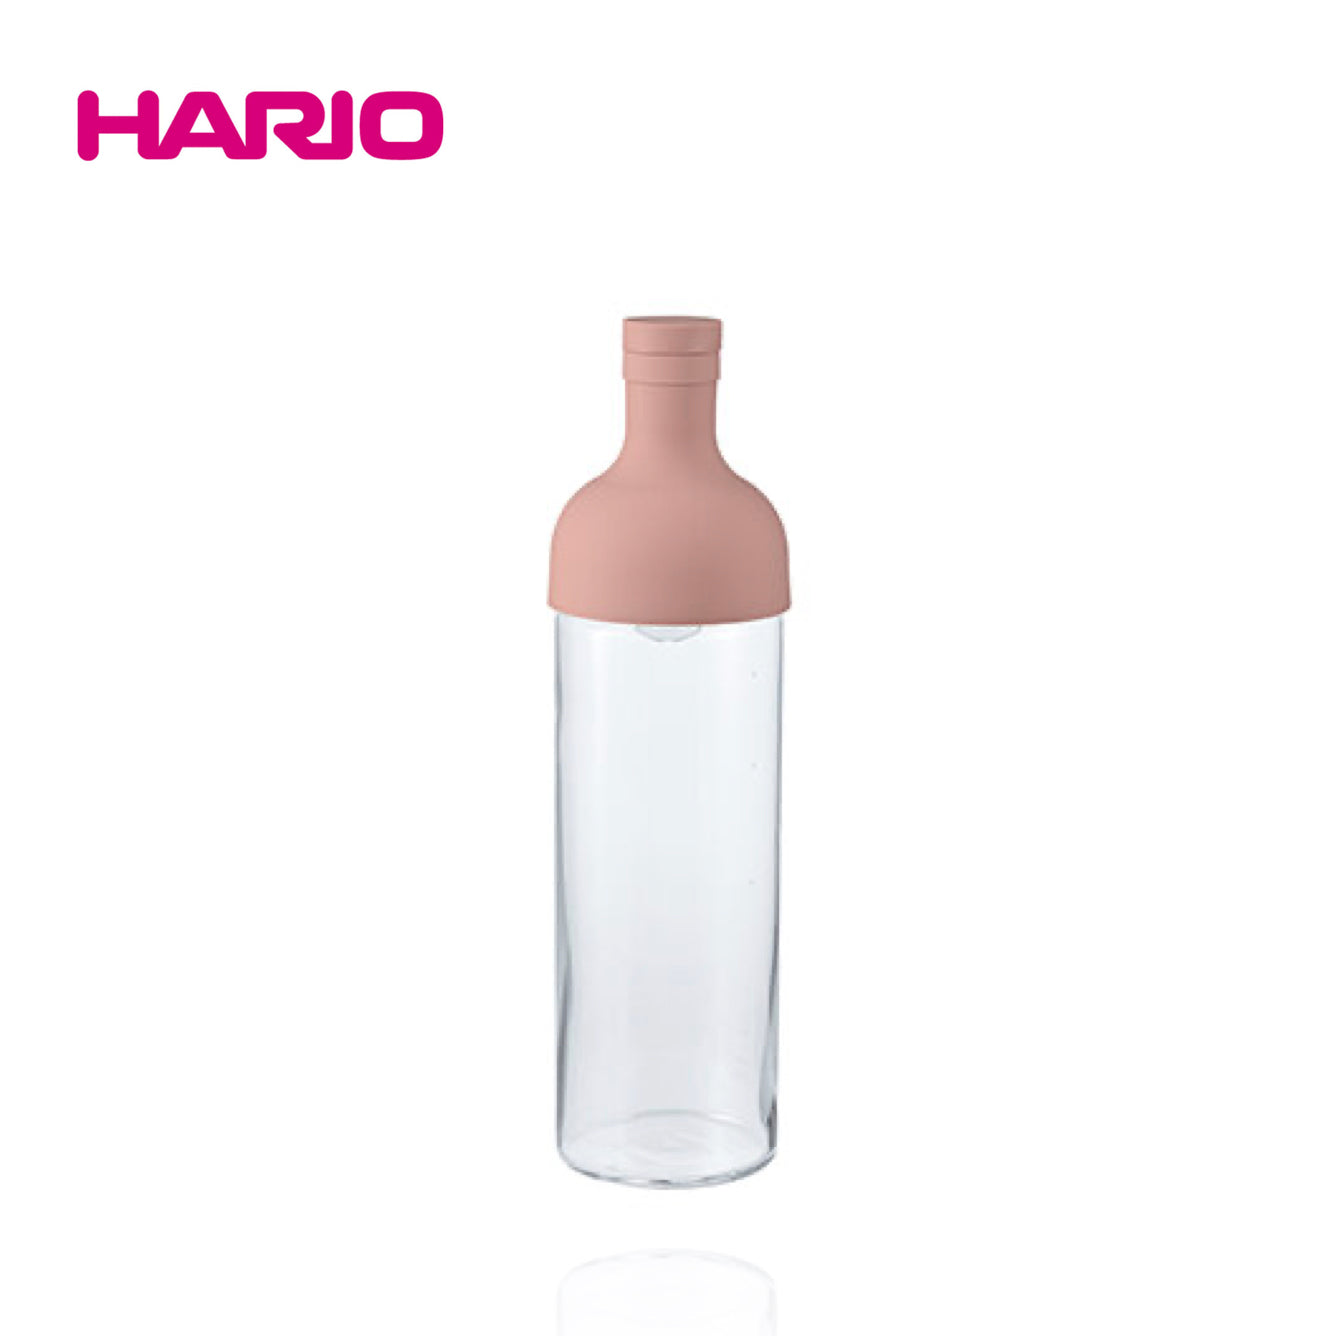 Hario Cold Brew Filter-in Tea Bottle smoky pink